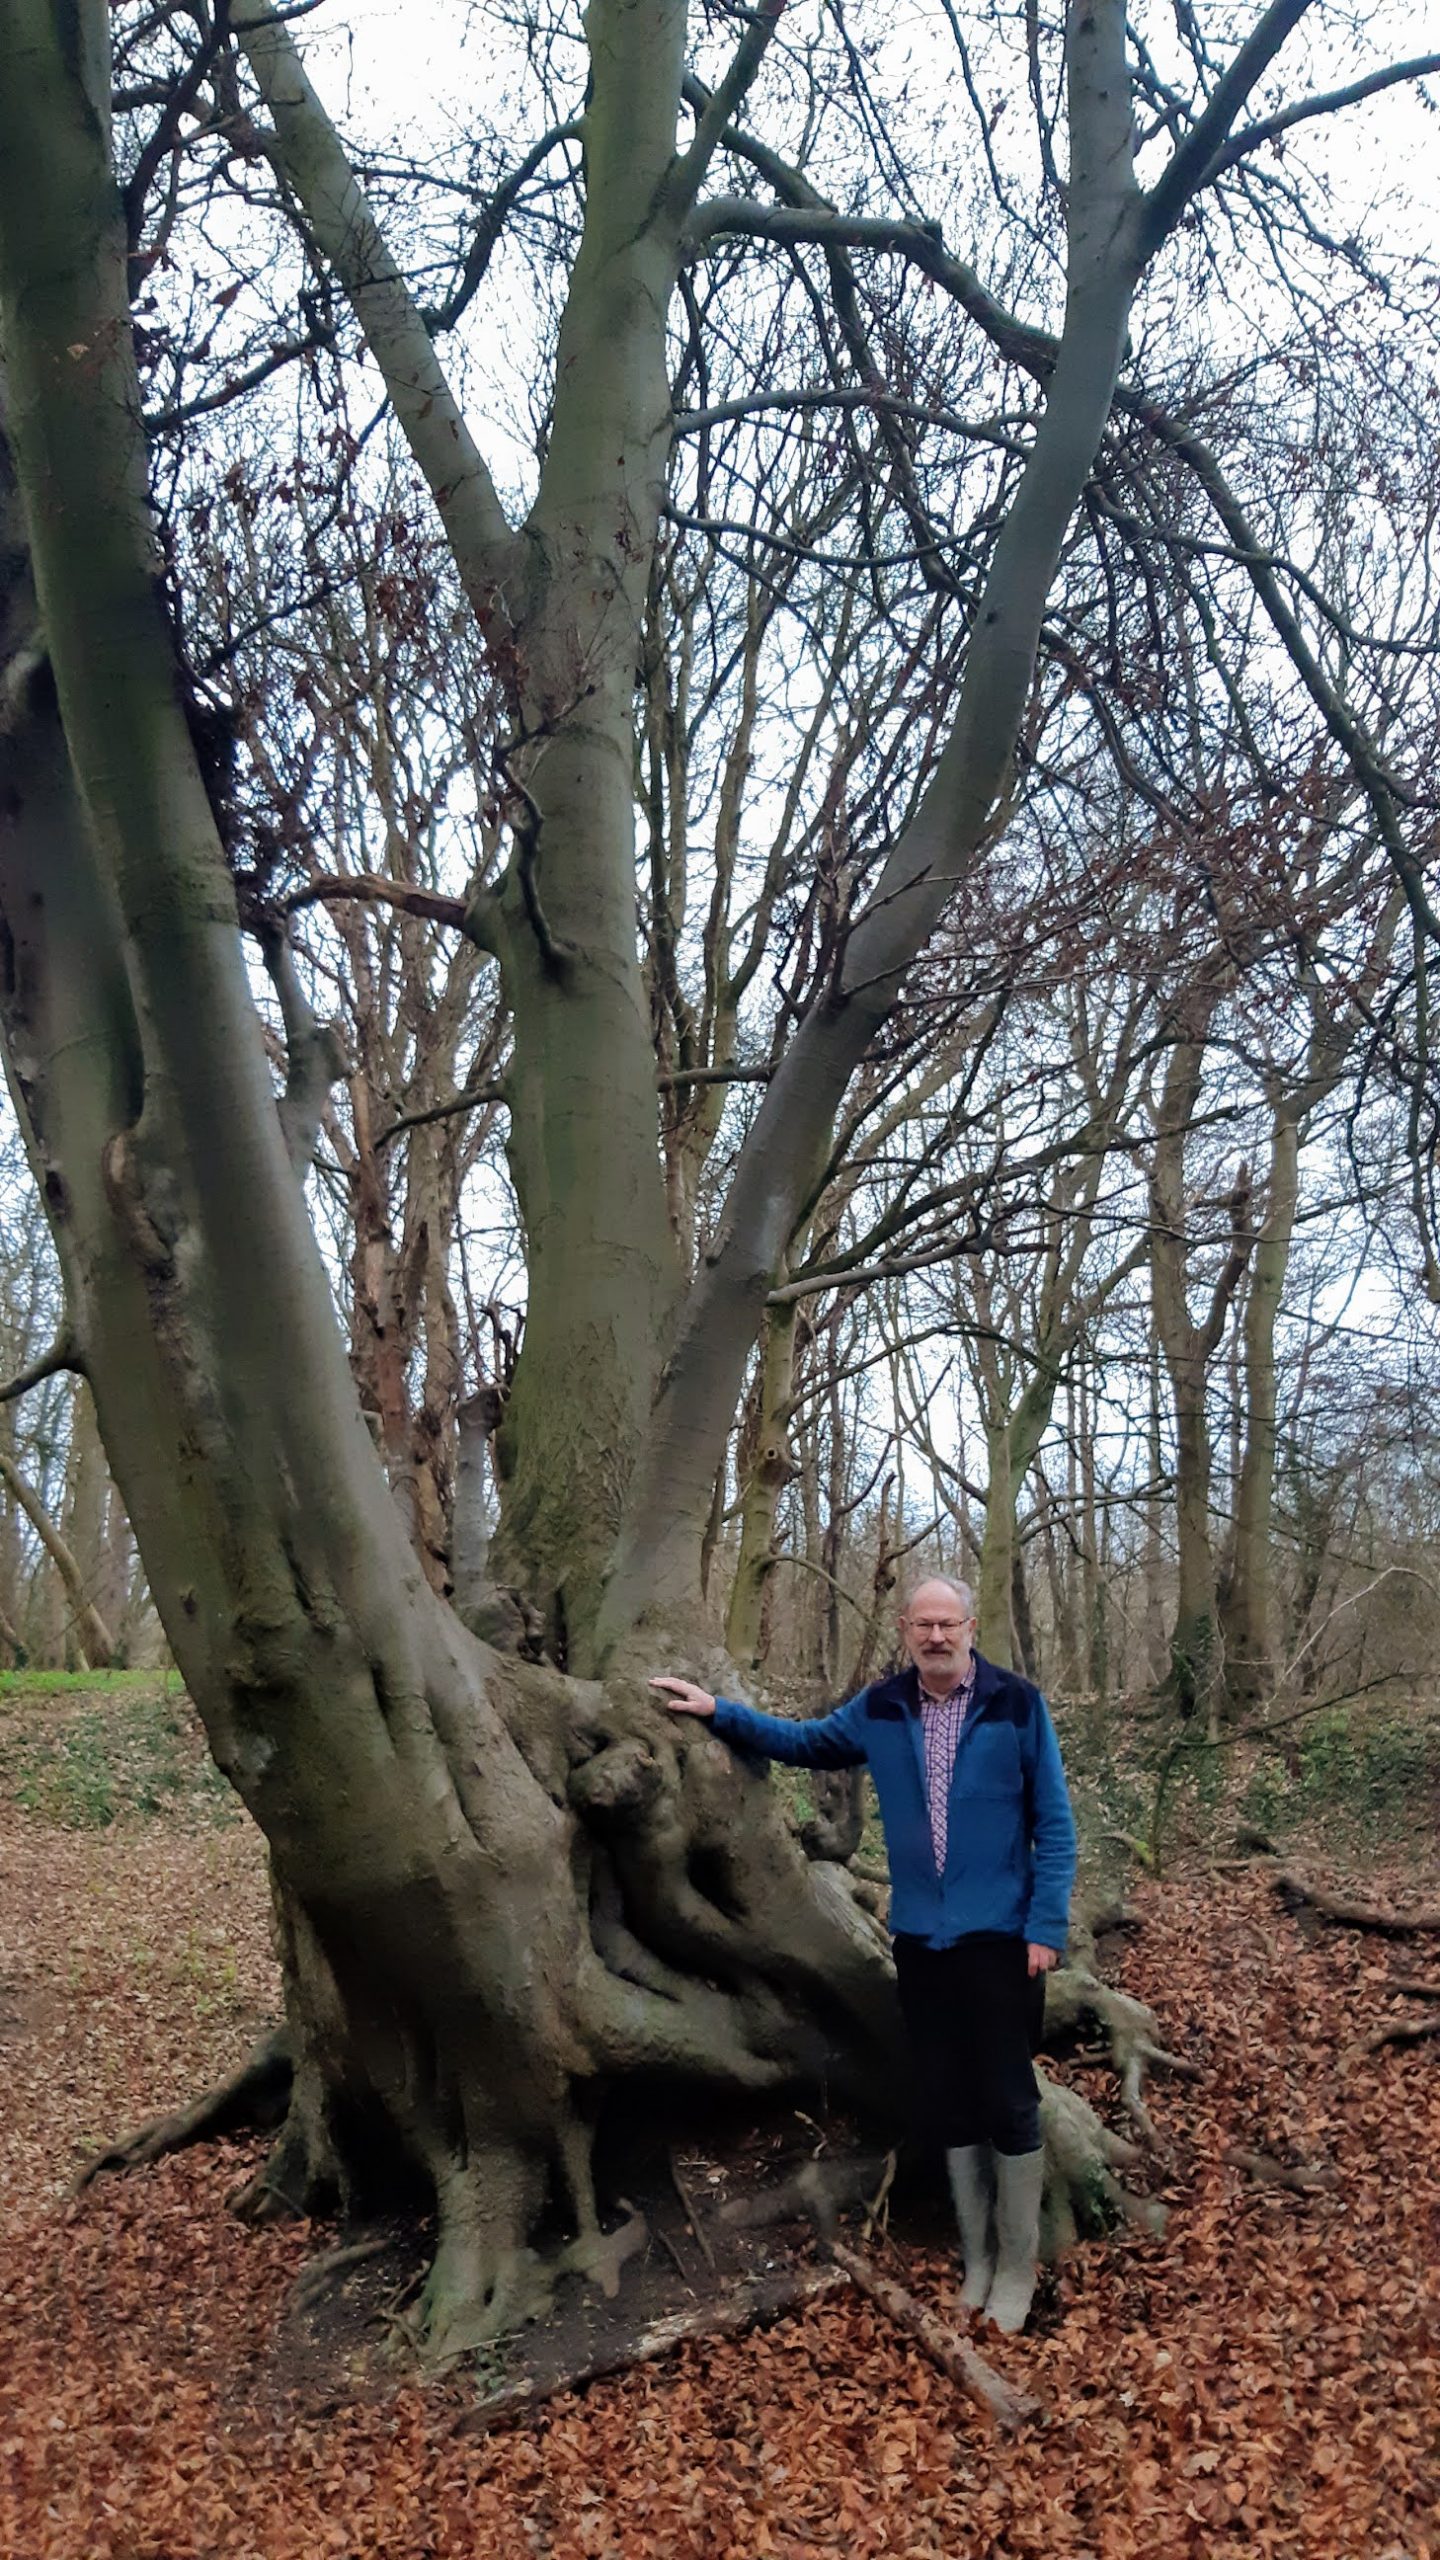 Chris stands next to an ancient tree with gnarled roots